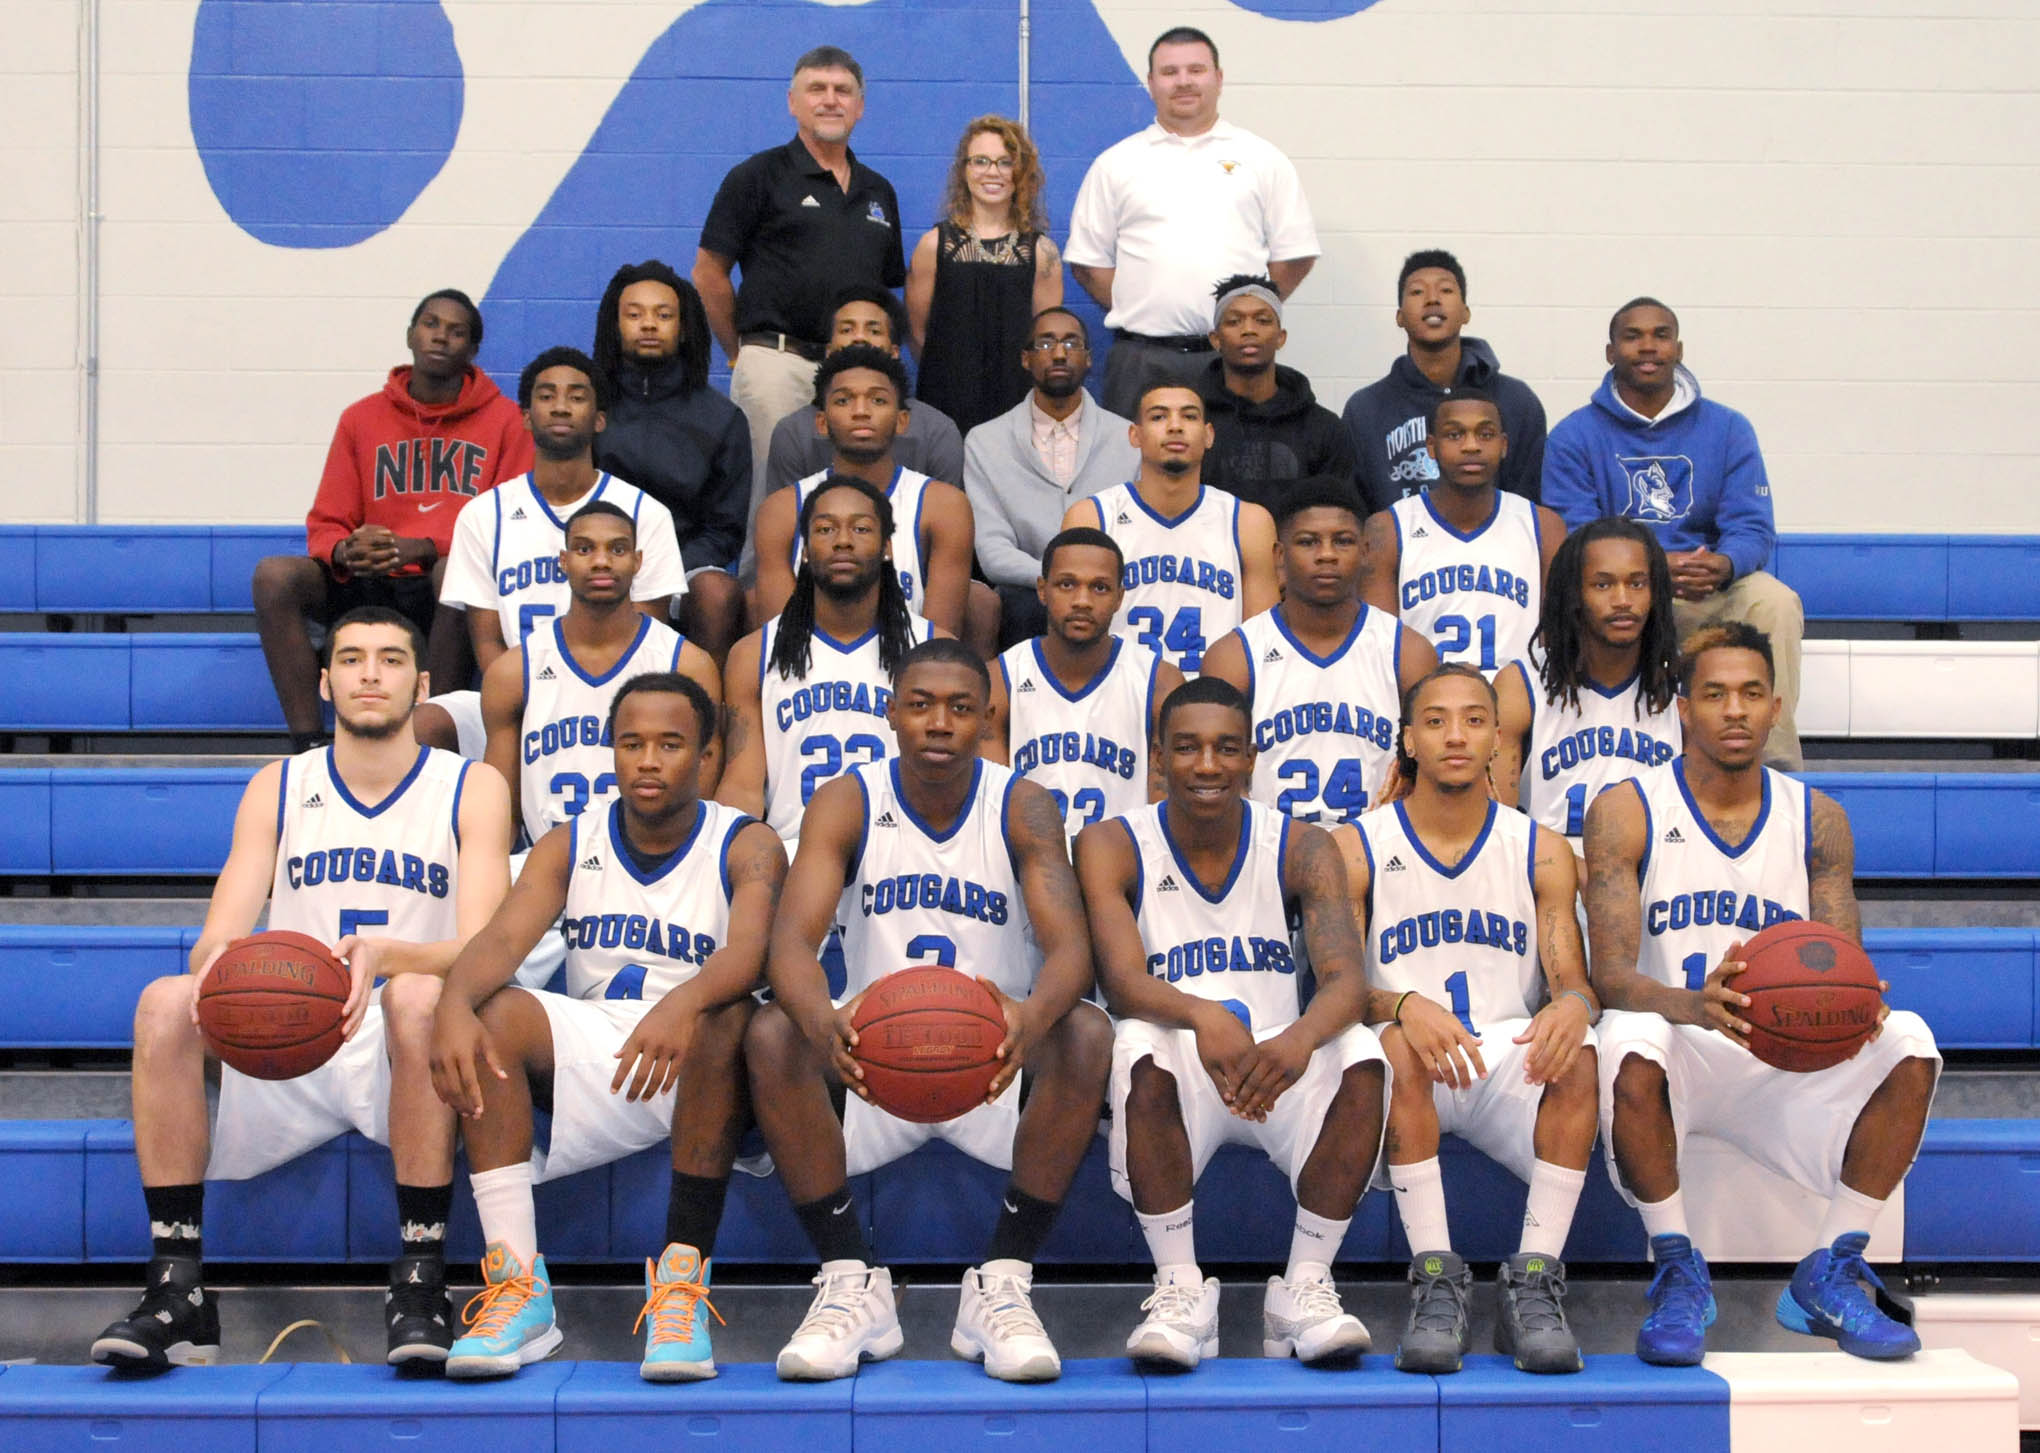 Speed, shooting will be strengths of CCCC men's basketball team